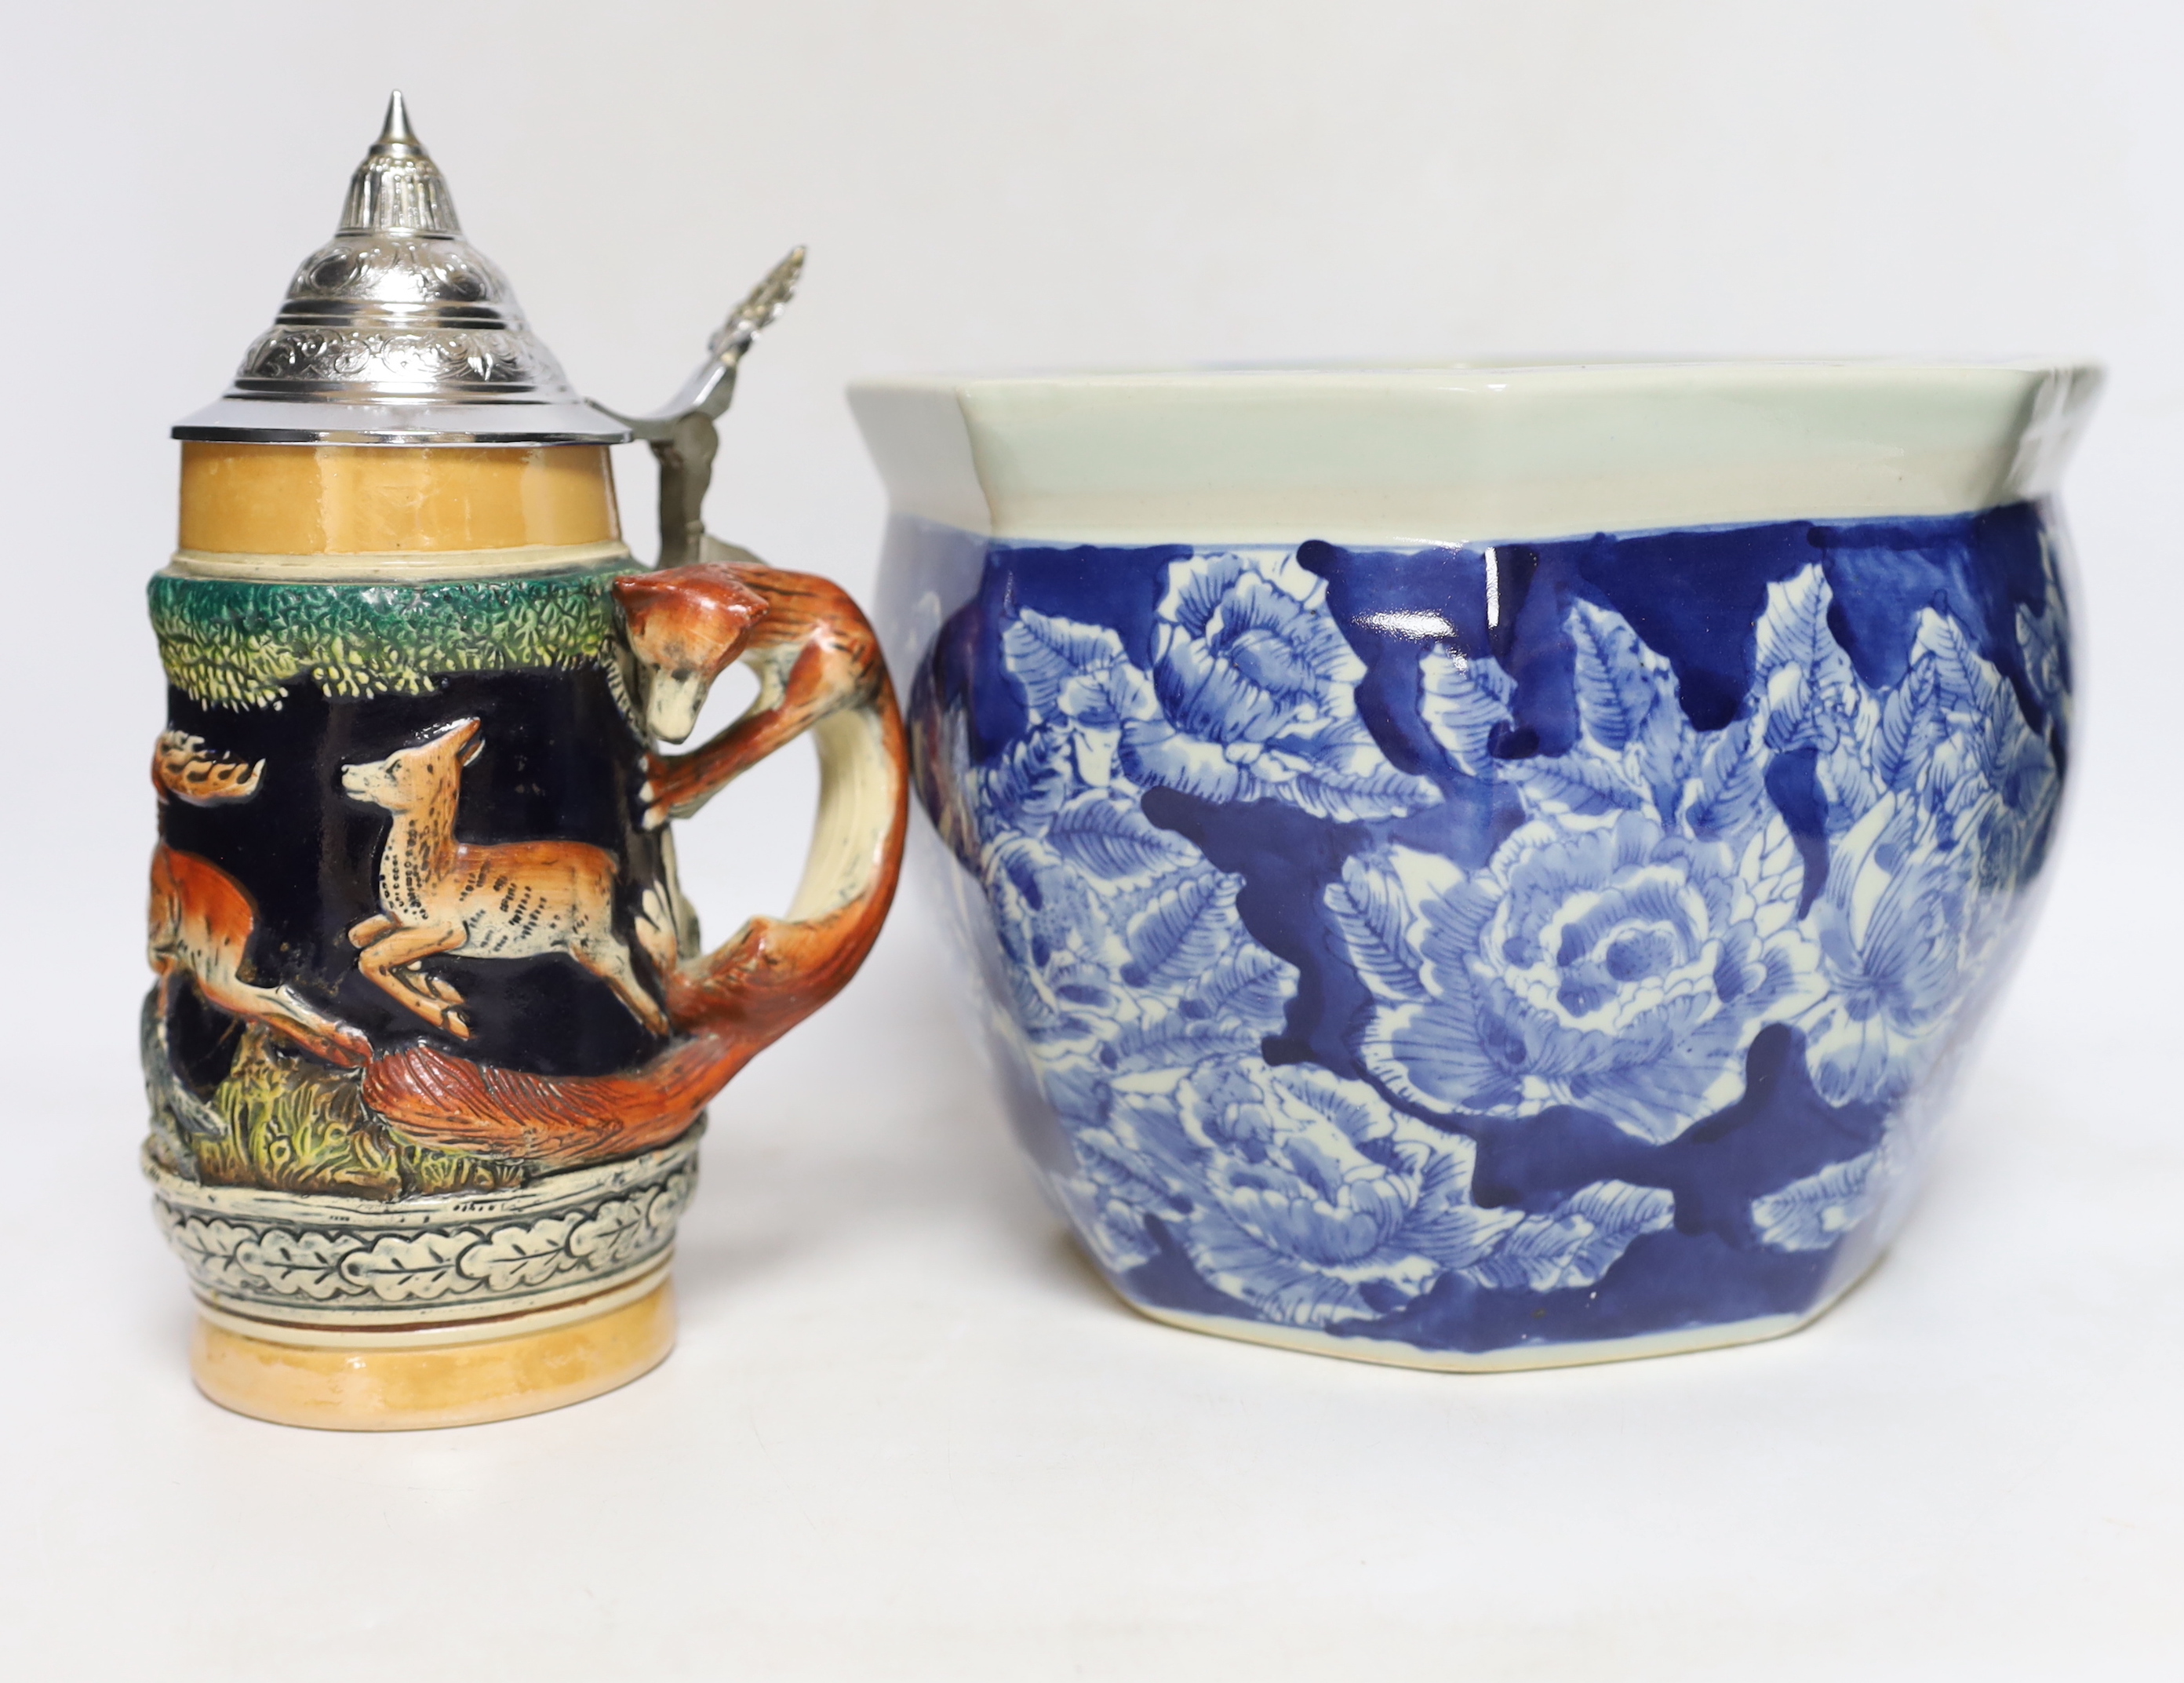 Three Sadler pottery teapots, a blue and white Chinese jardiniere, etc. (8)